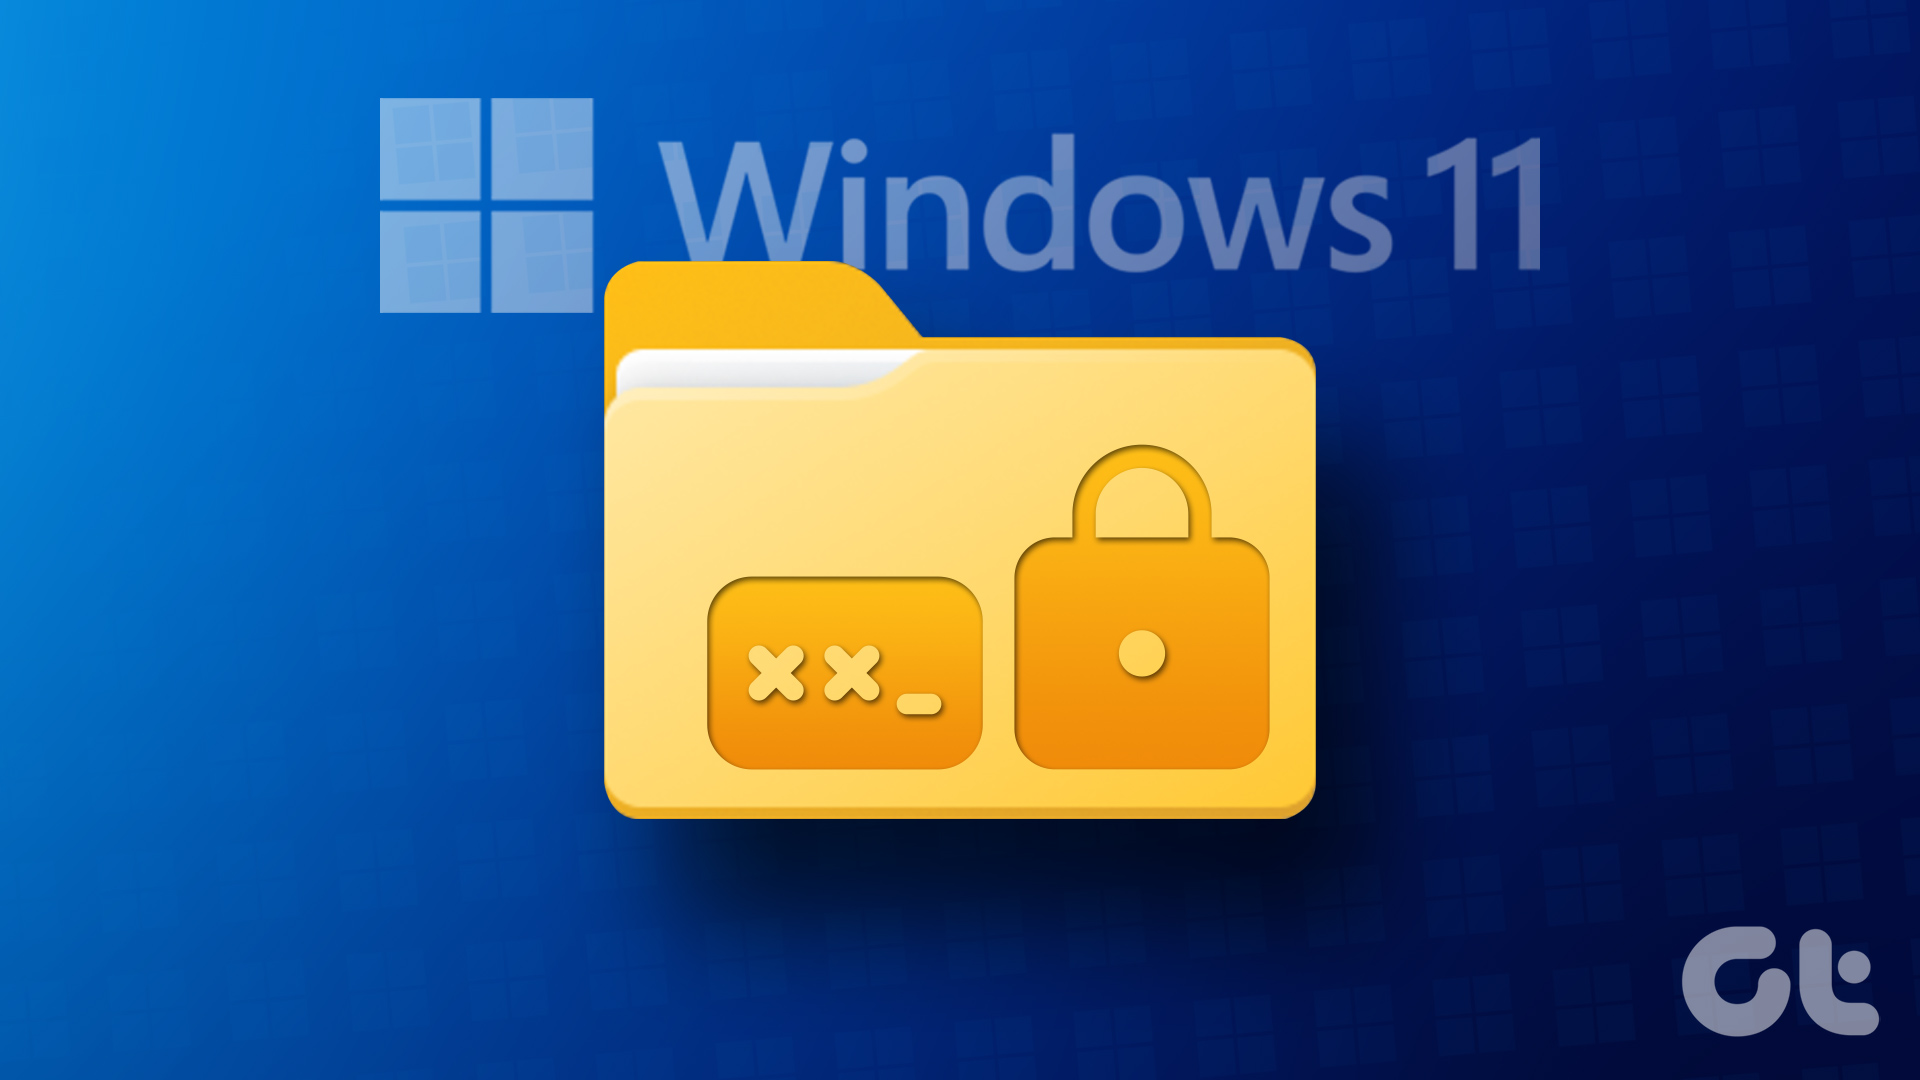 Password protect a folder in Windows 11.